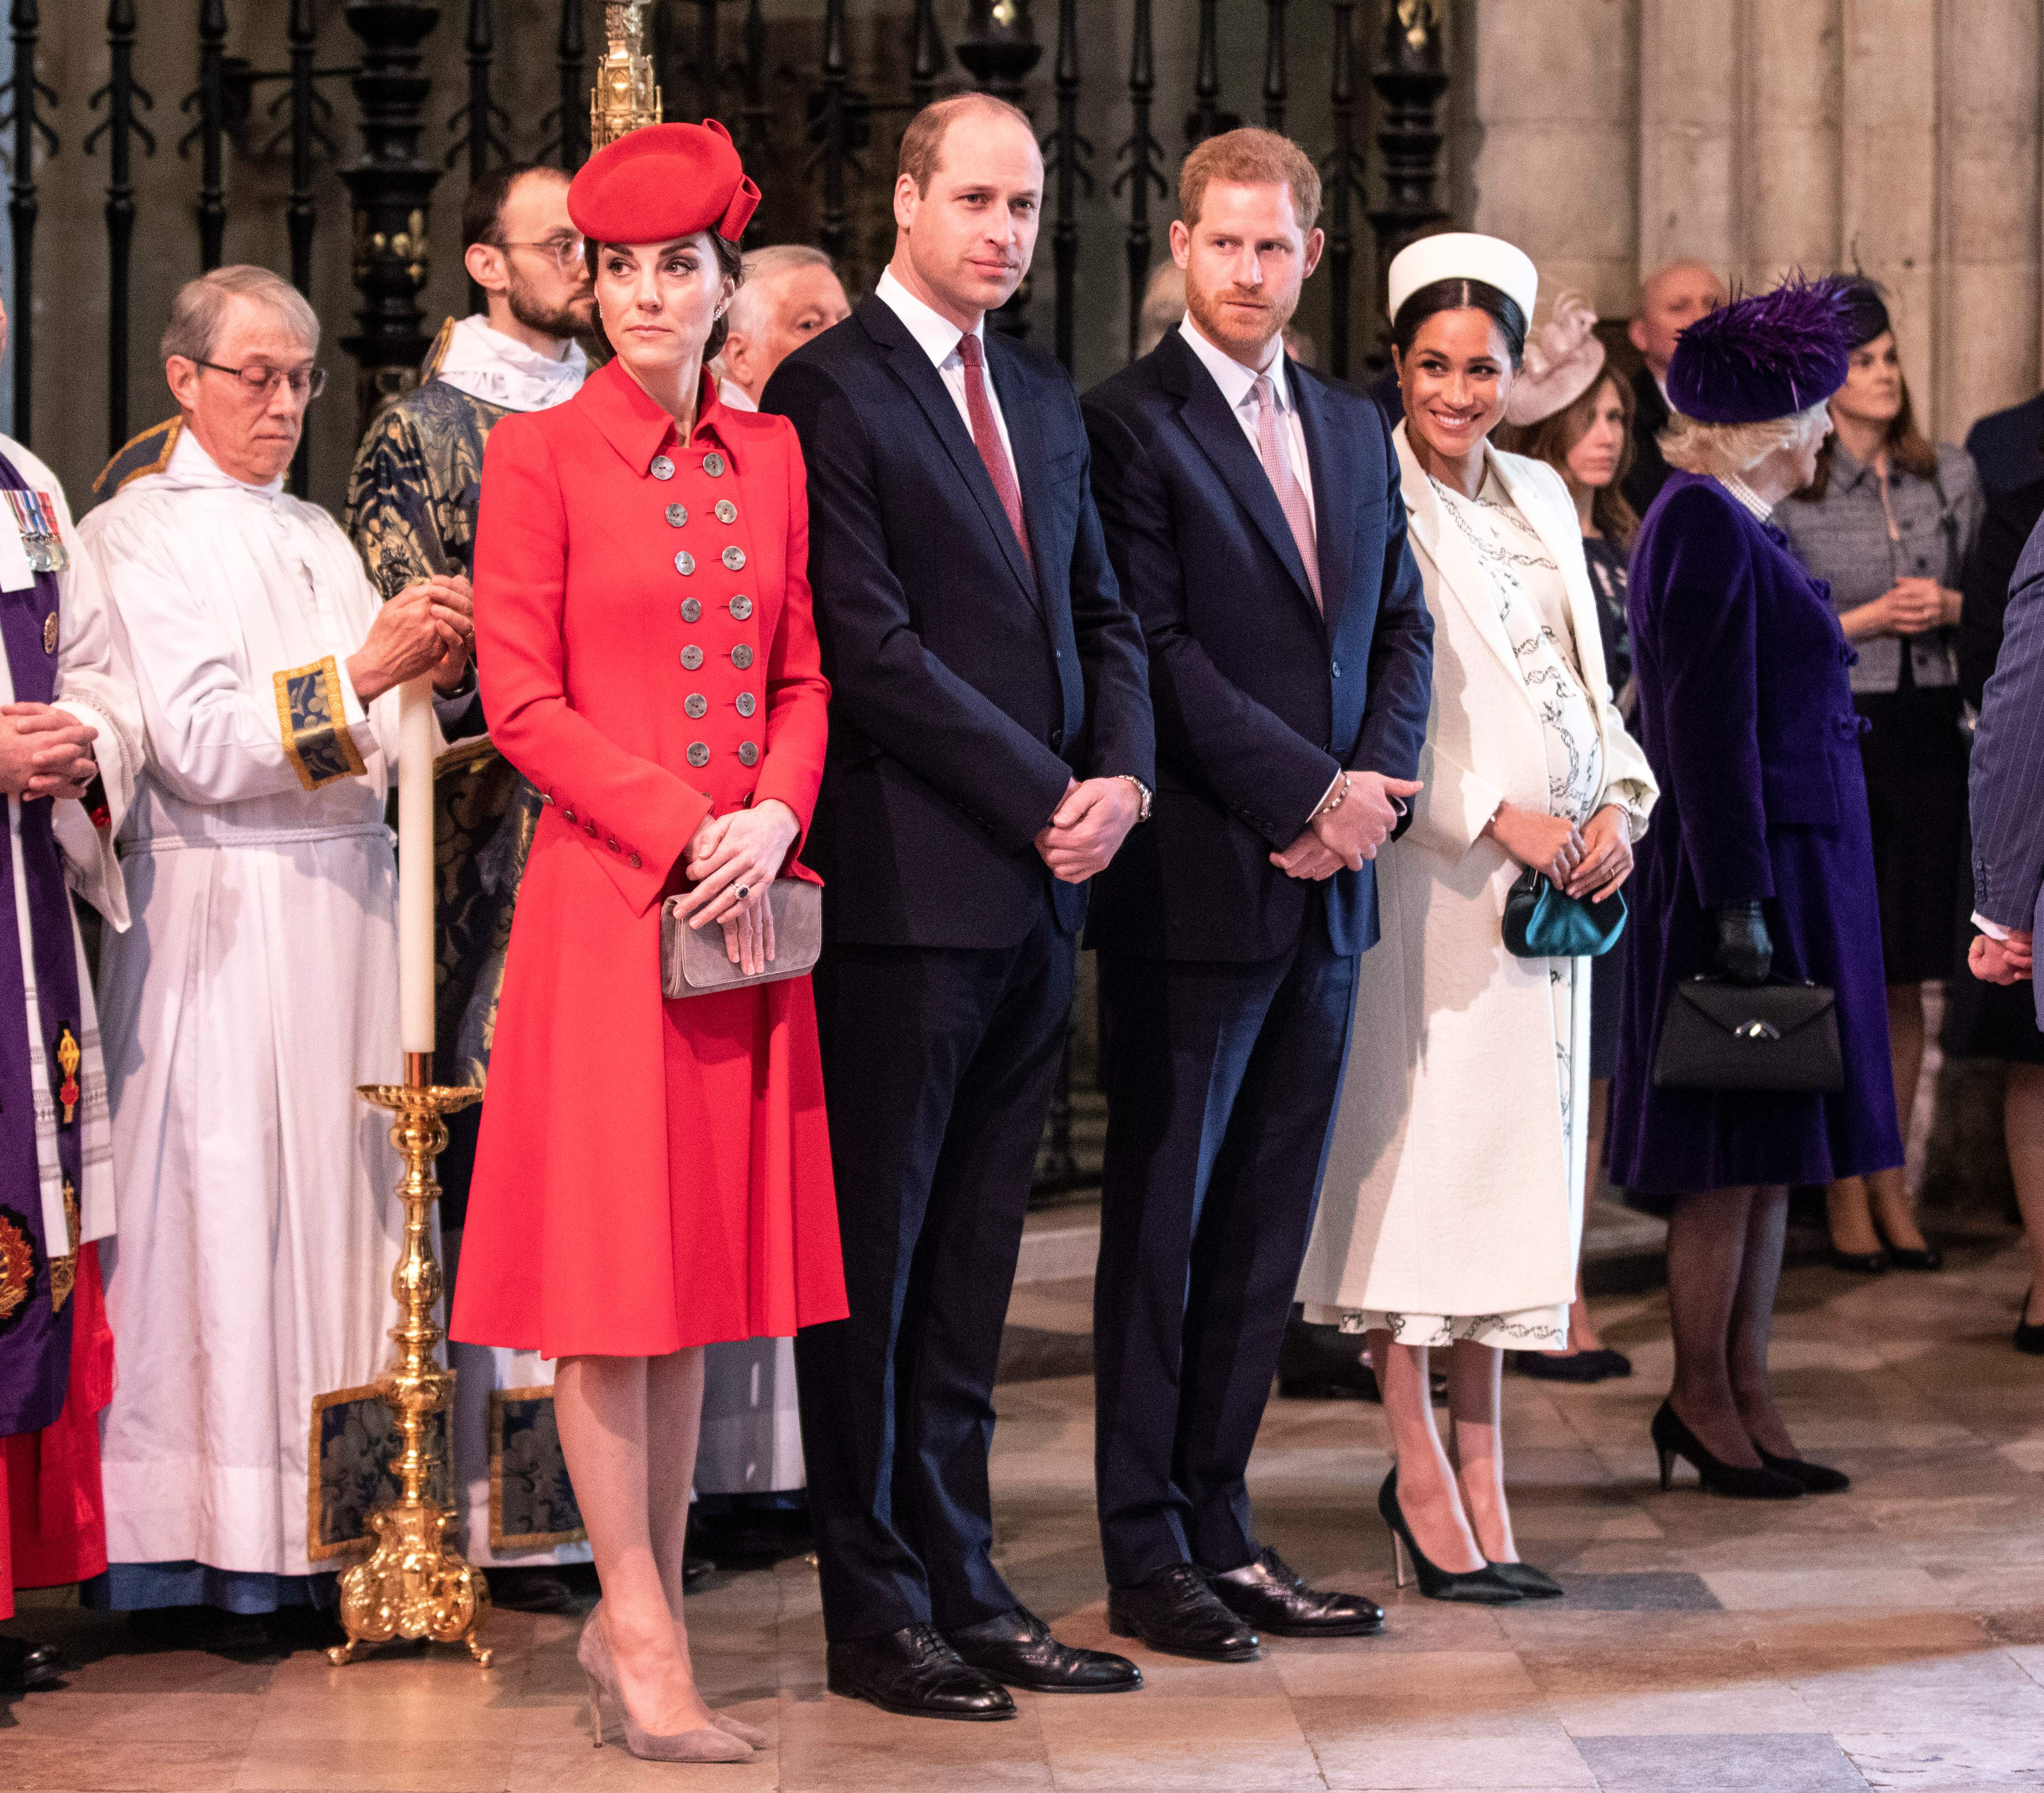 Duchess Kate, Prince William, Prince Harry, and Duchess Meghan at the Commonwealth Day service at Westminster Abbey in London on March 11, 2019. | Source: Getty Images